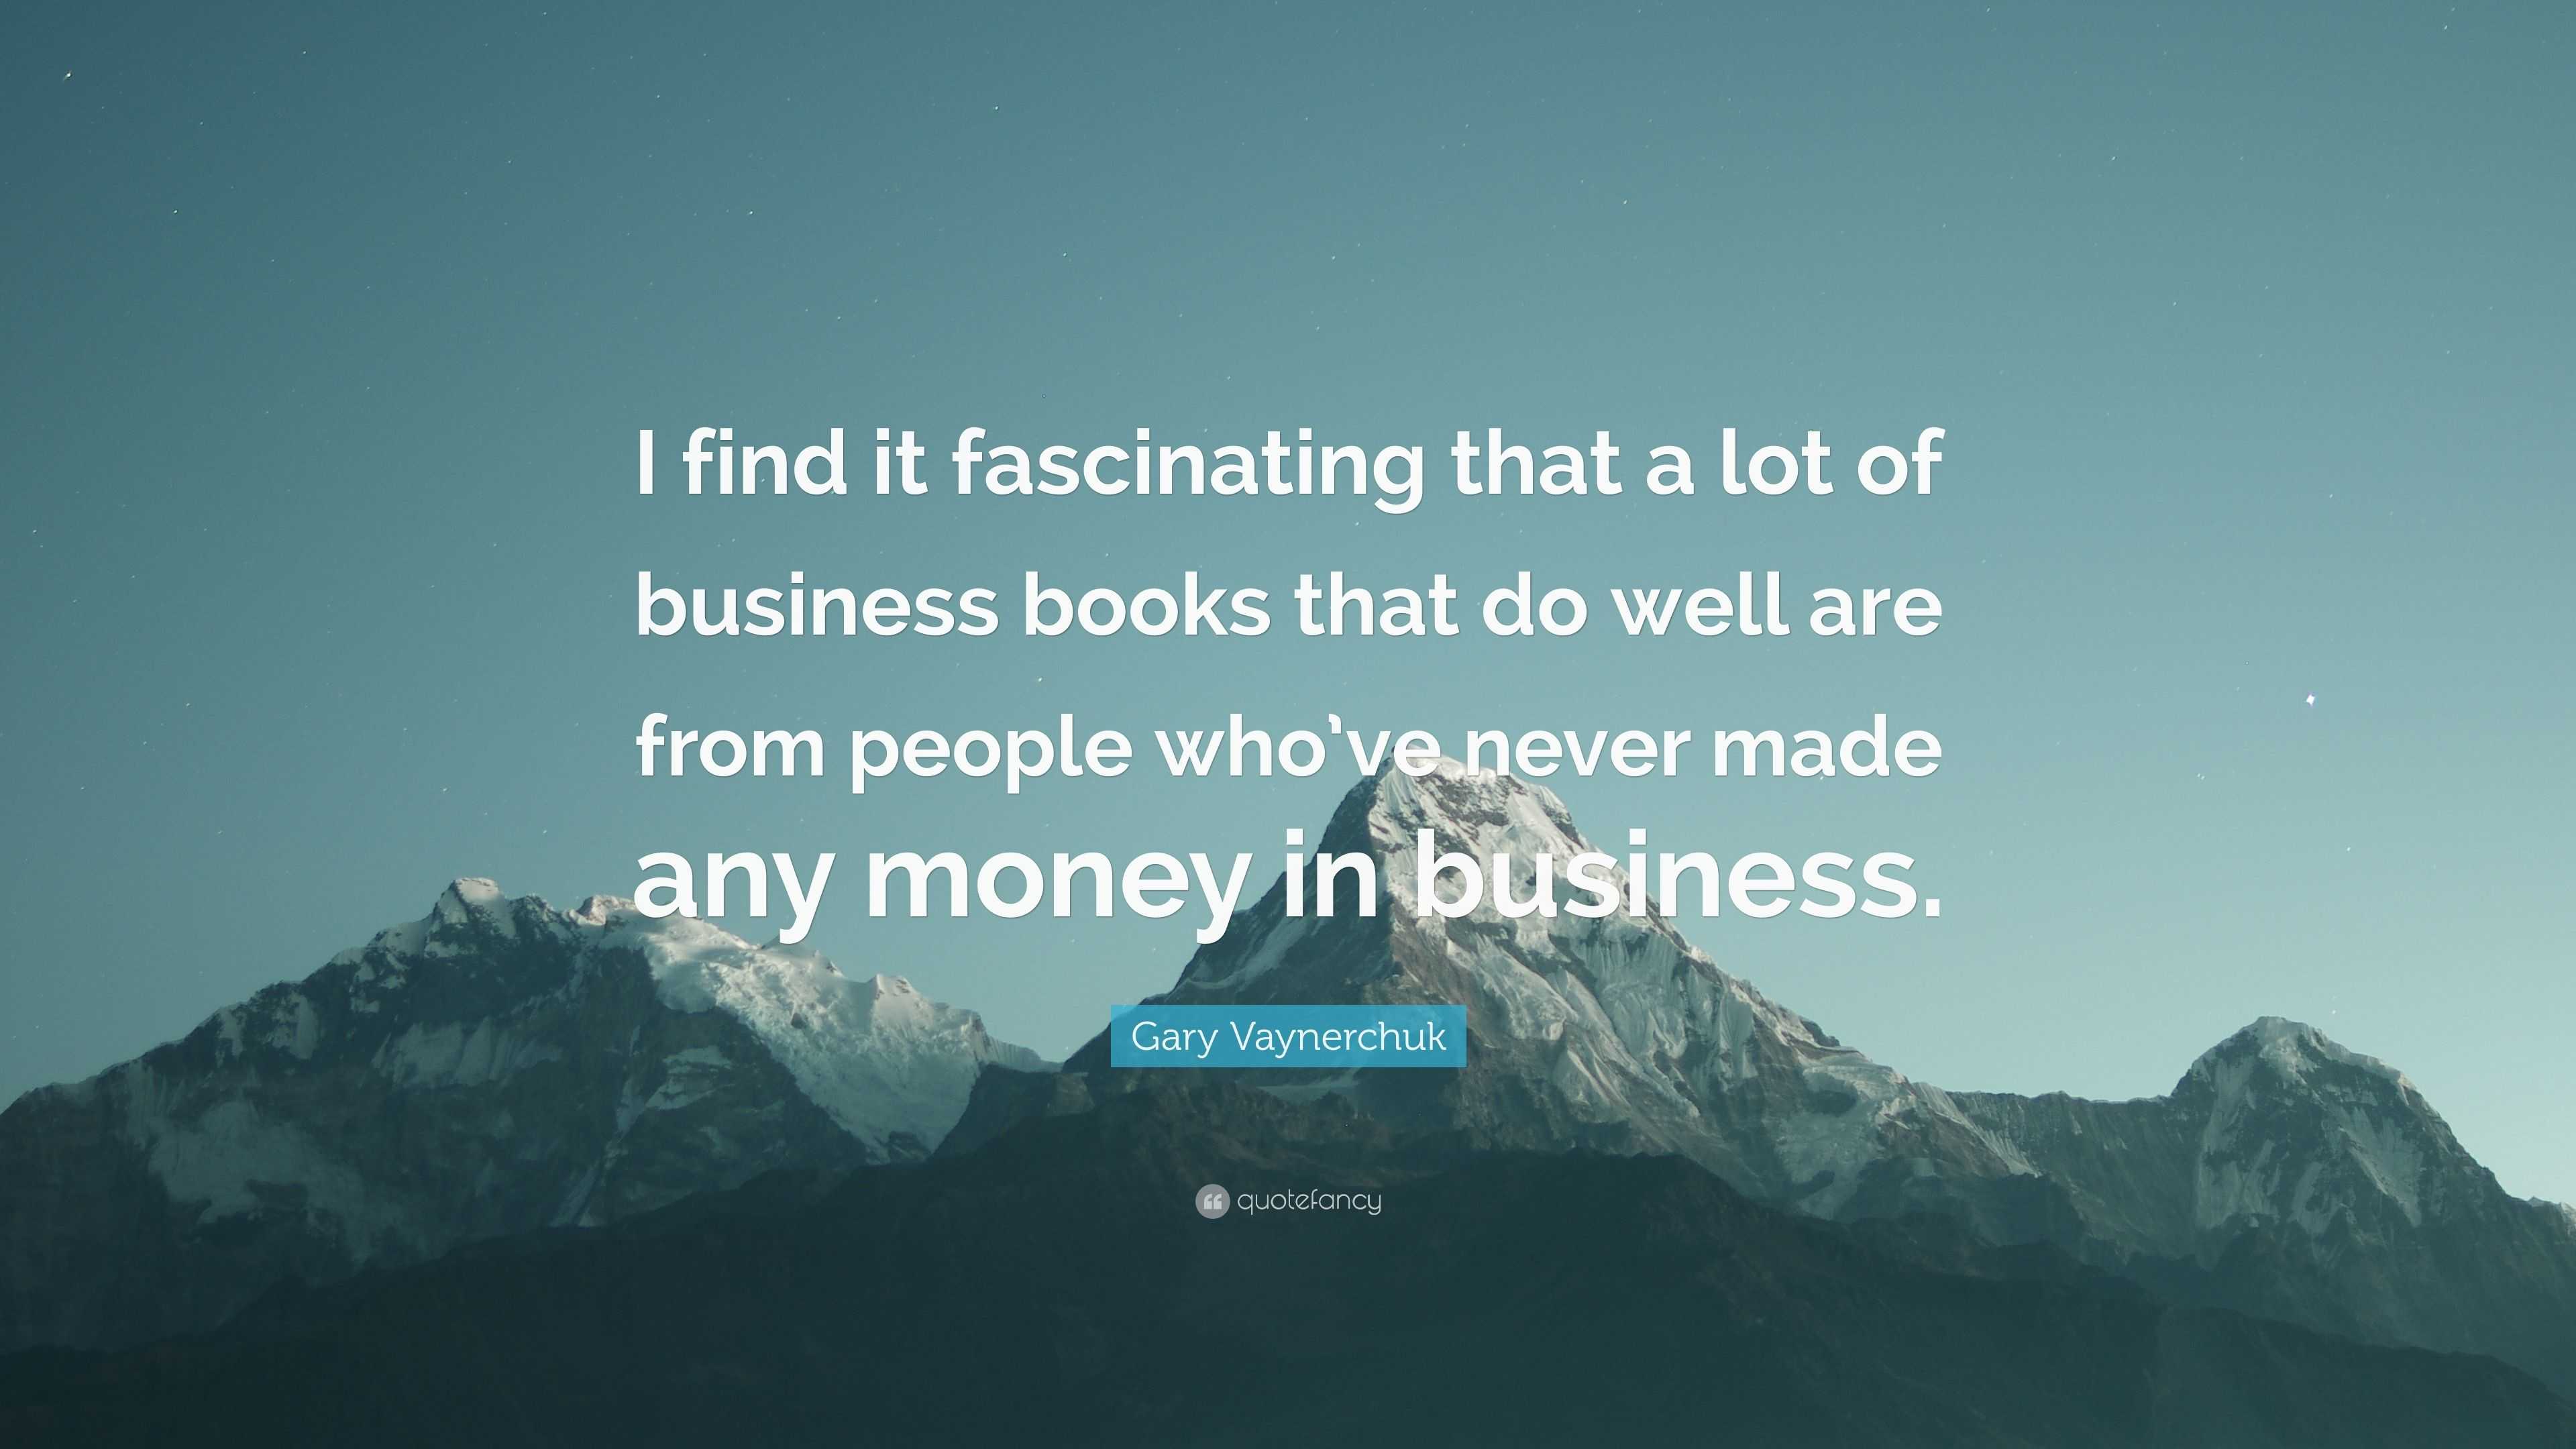 Gary Vaynerchuk Quote: “I find it fascinating that a lot of